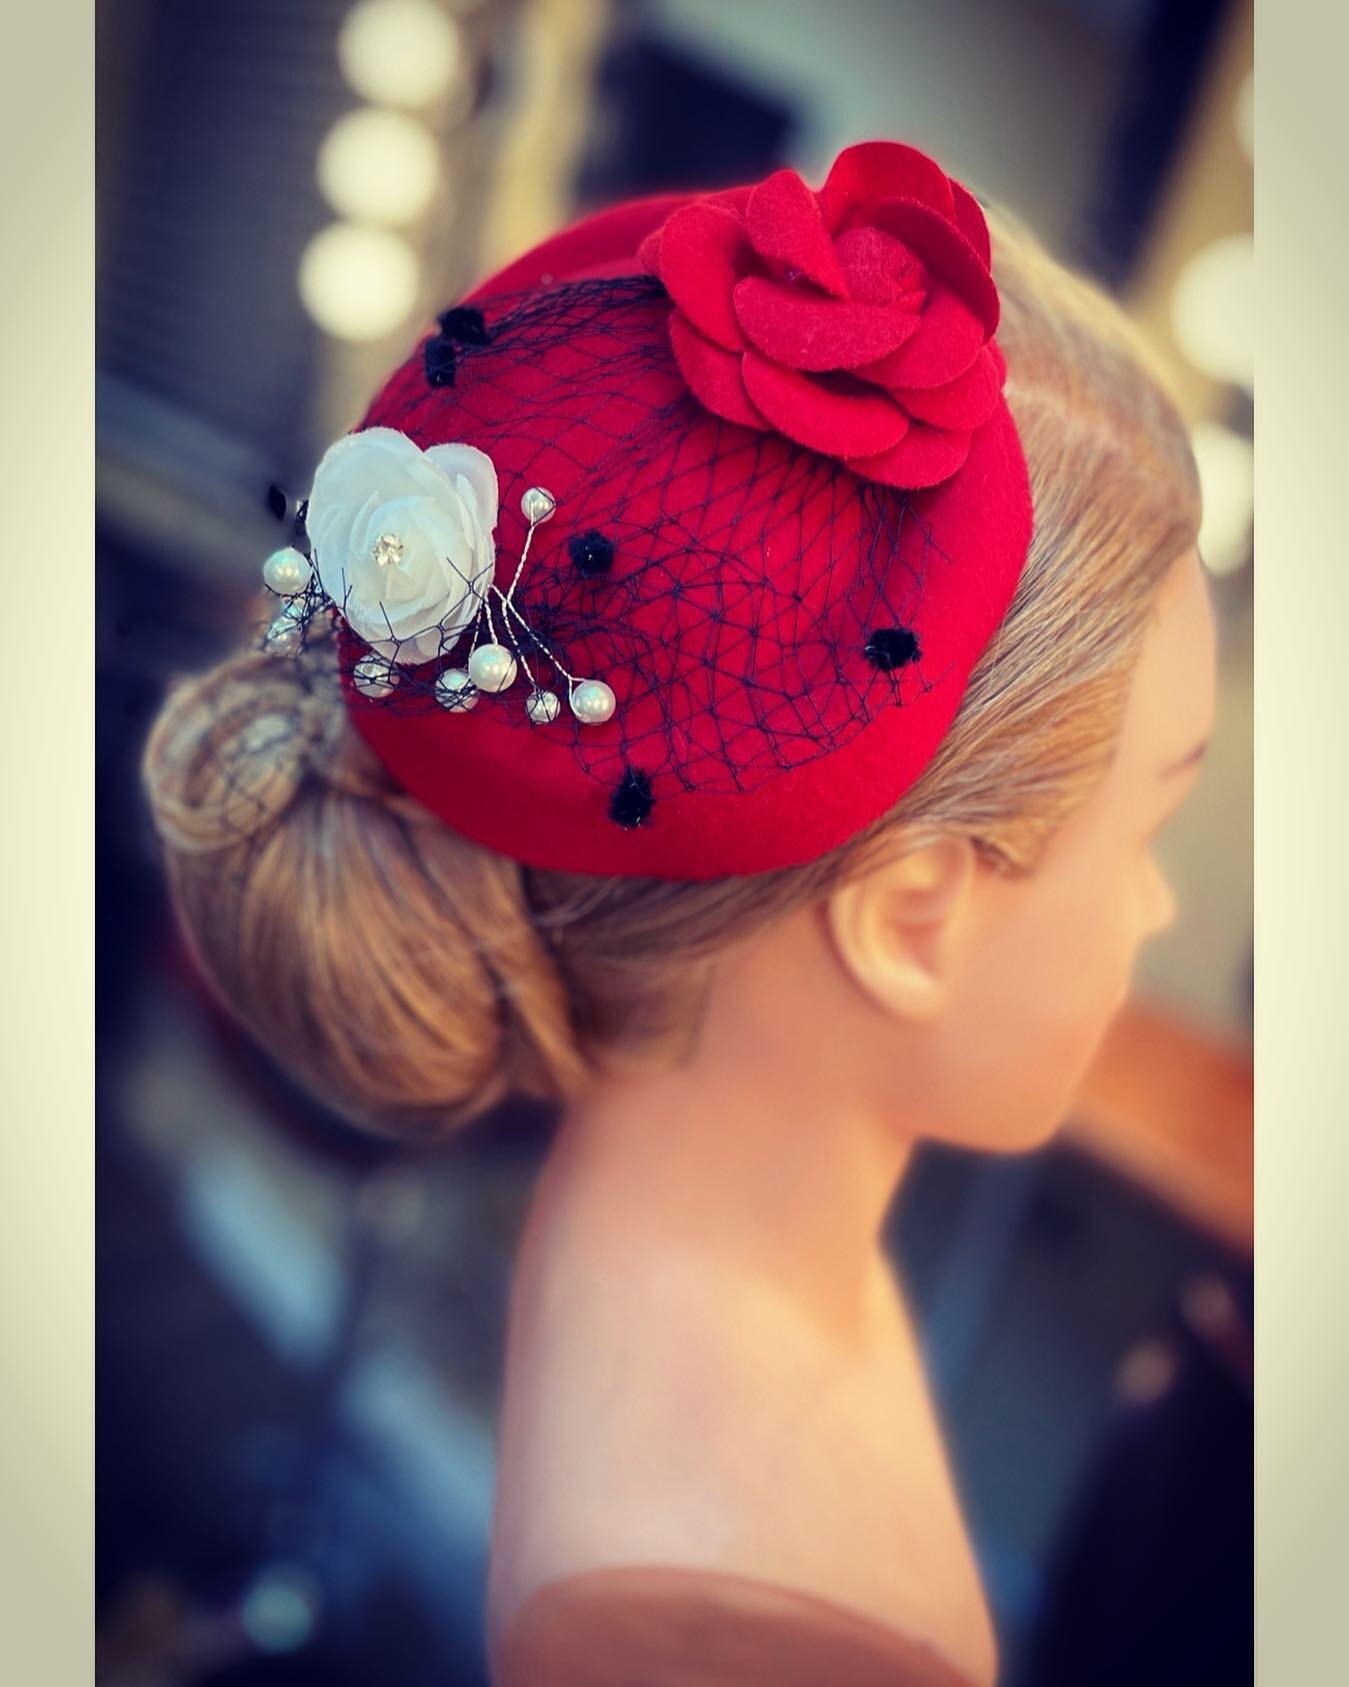 Cynthia Goes Retro Part II 💋💋
I&rsquo;m so proud to say that finished my bridal hairstyling classes and am now certified!  Hairstyling will always be a work in progress for me, but I&rsquo;m getting there! Biggest thank you to @prettylilrenee for t